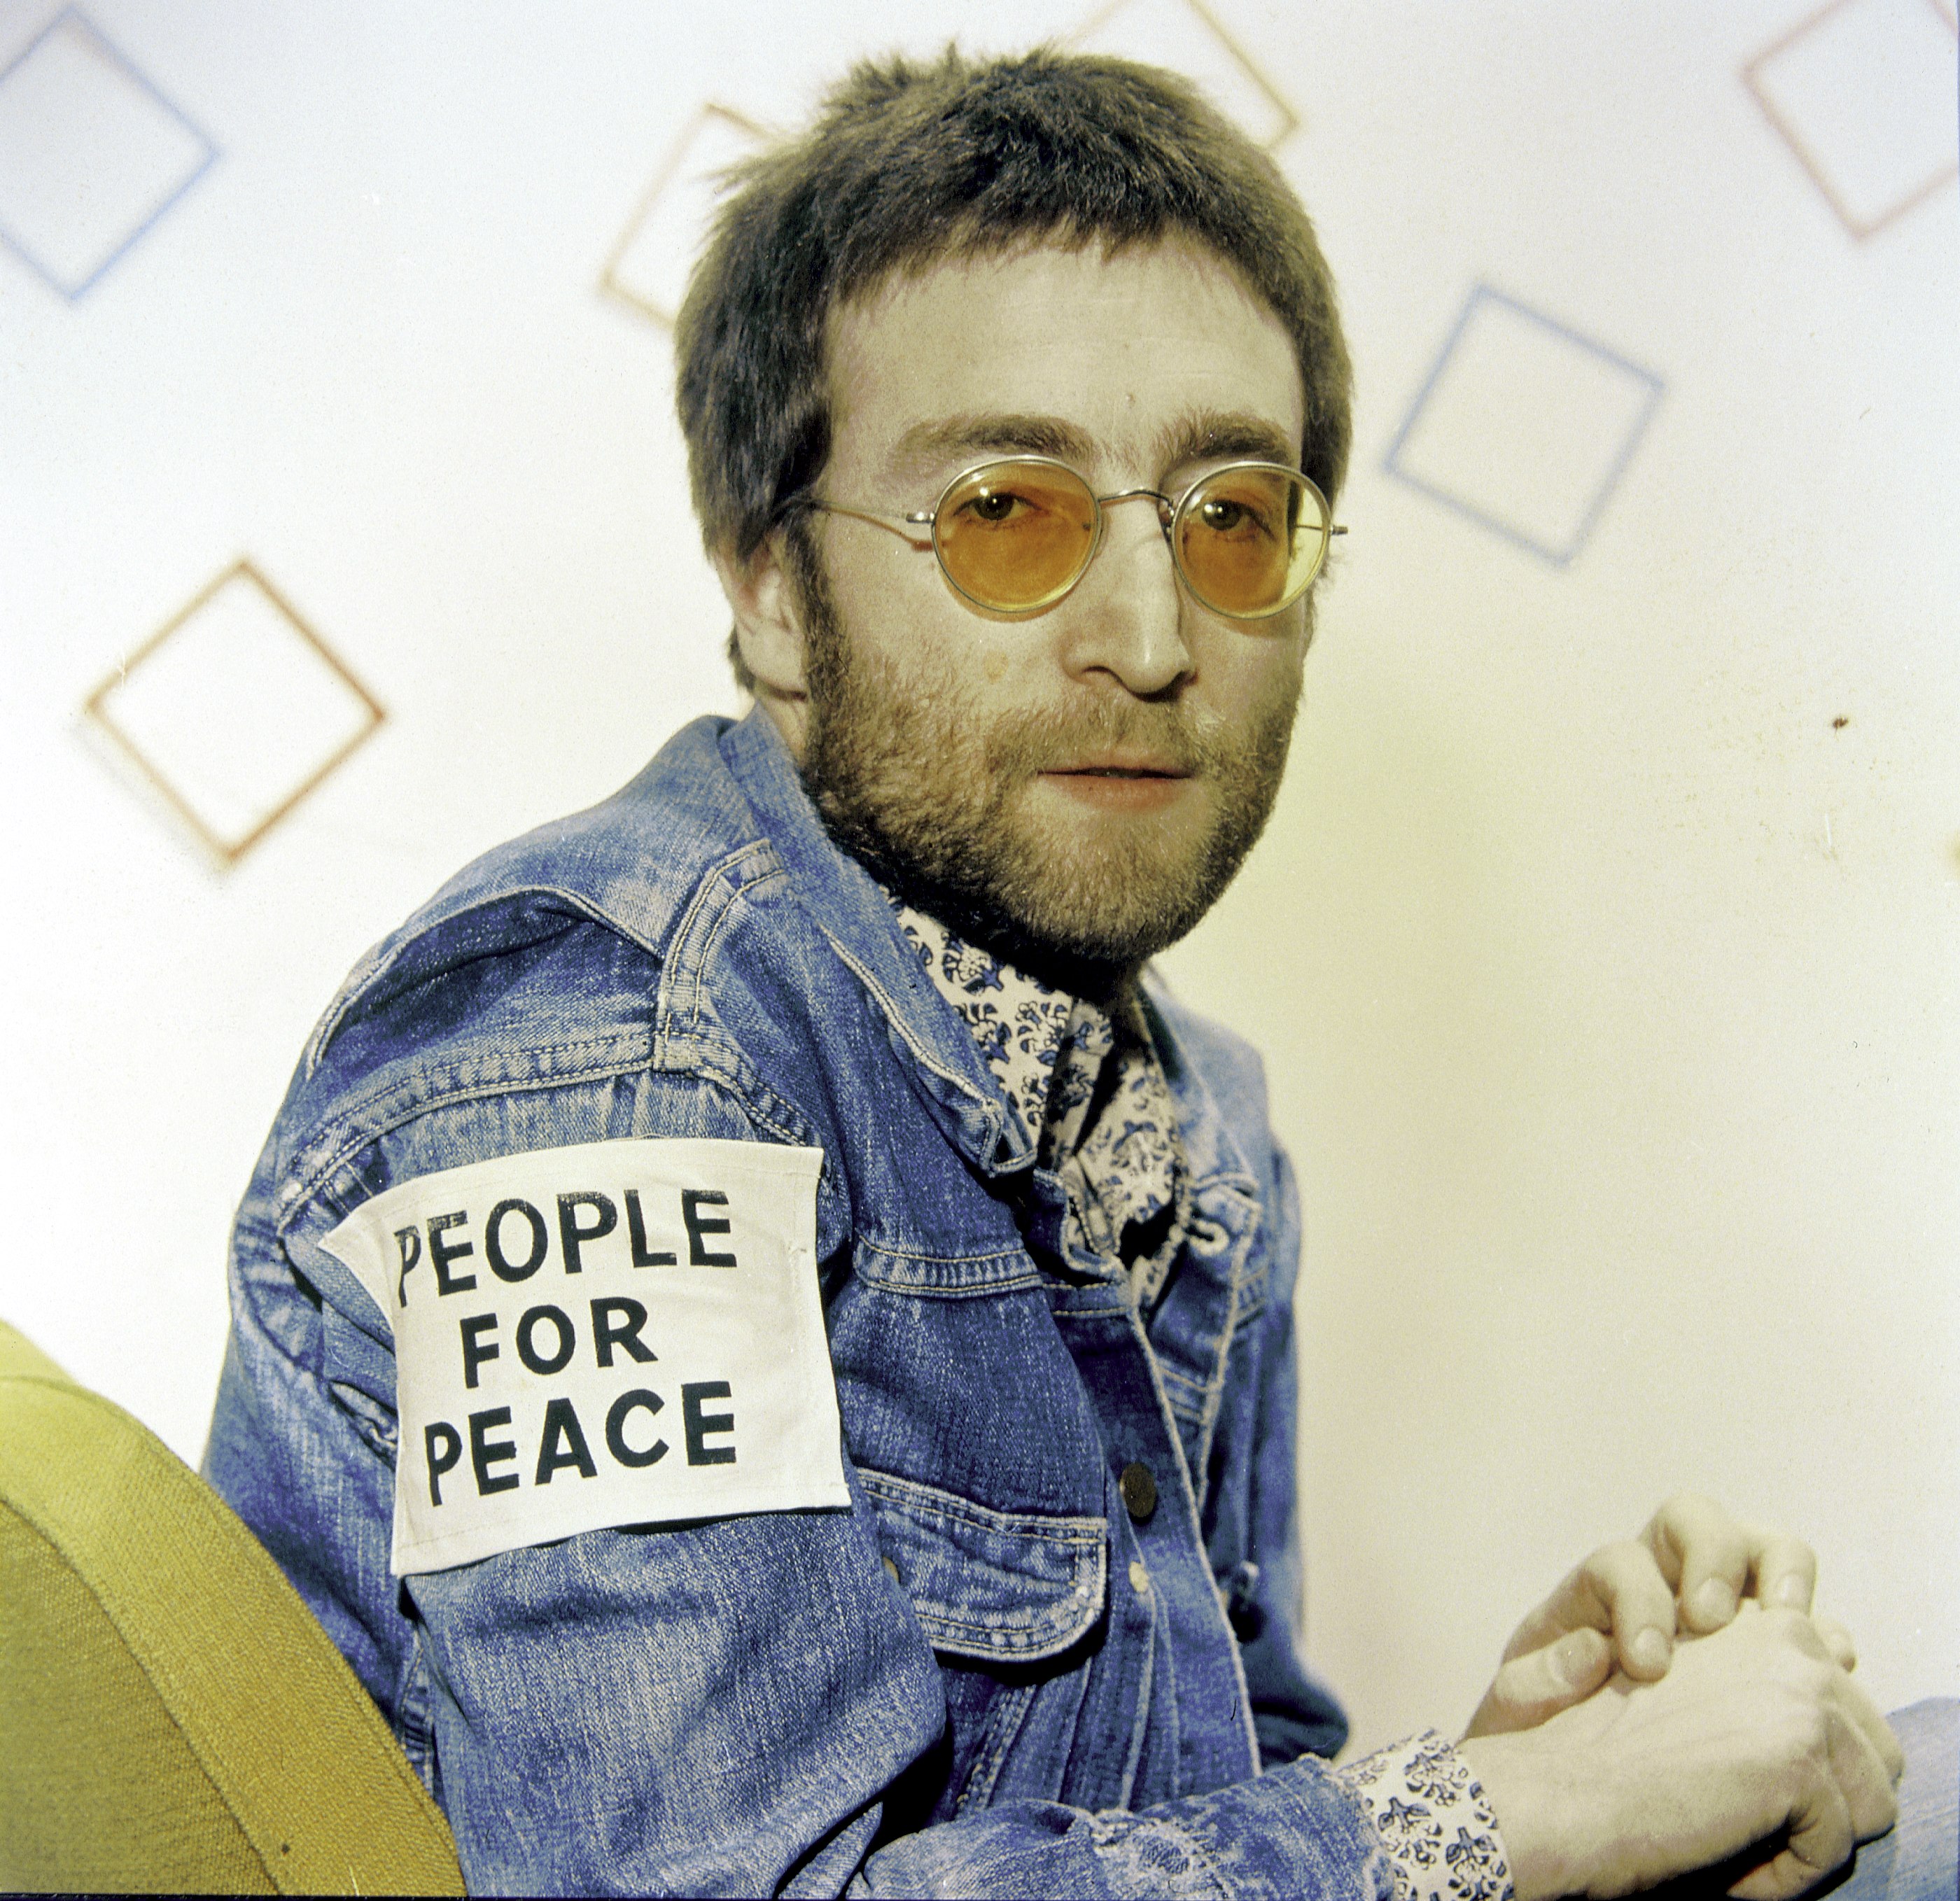 John Lennon wearing a patch that says "People for Peace"